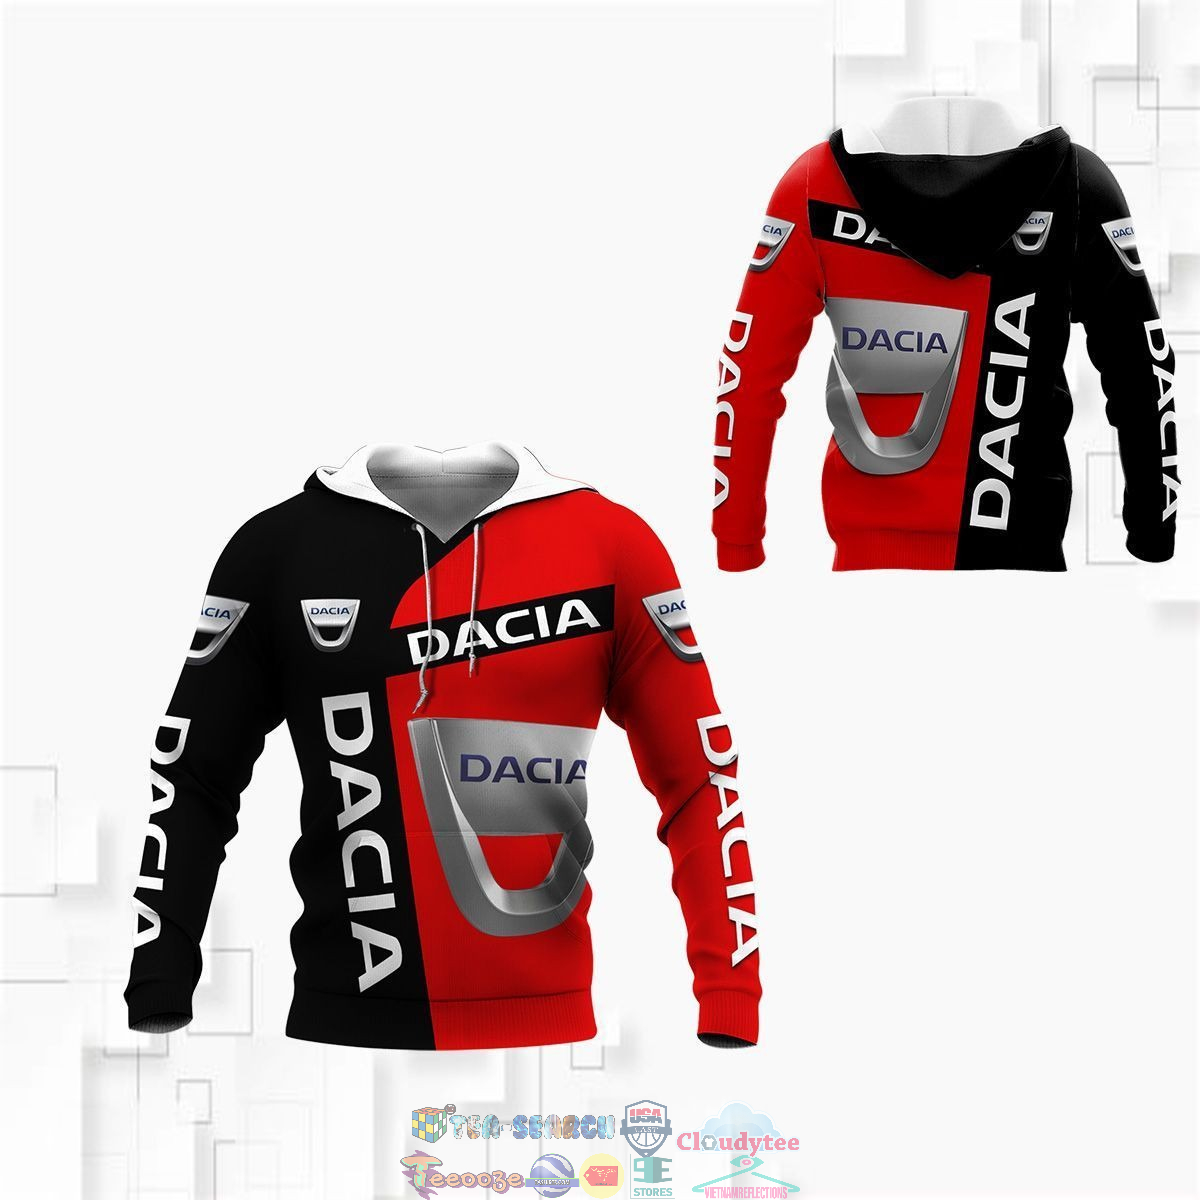 Automobile Dacia ver 1 3D hoodie and t-shirt